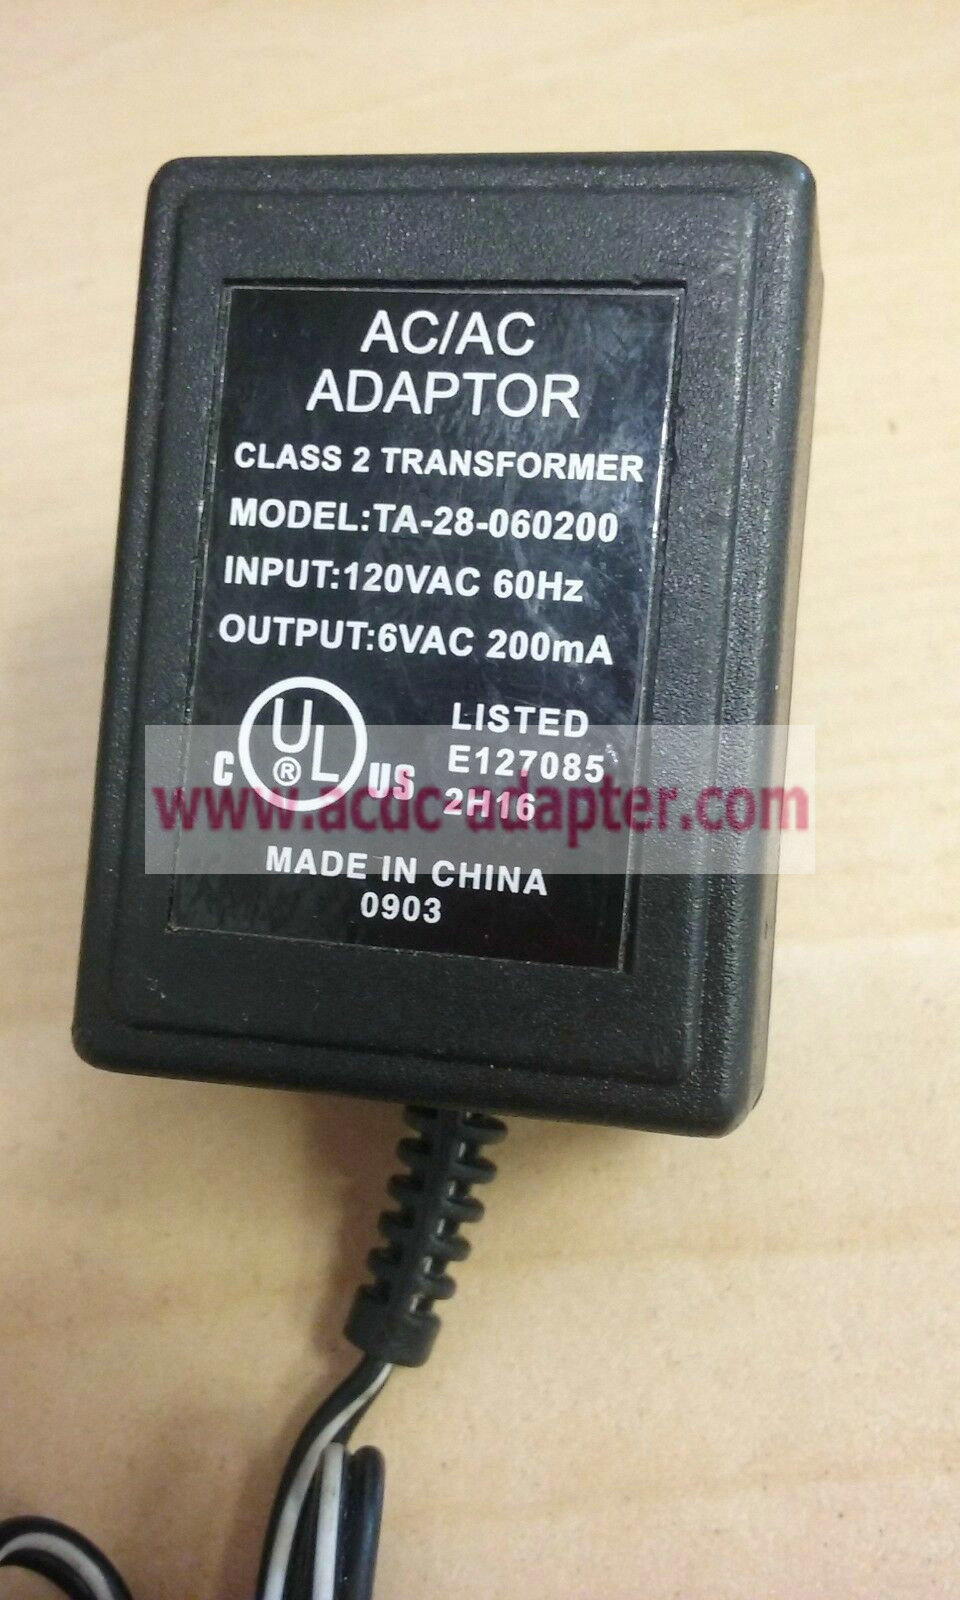 New Generic TA-28-060200 6VAC 200mA AC Power Supply Charger Adapter